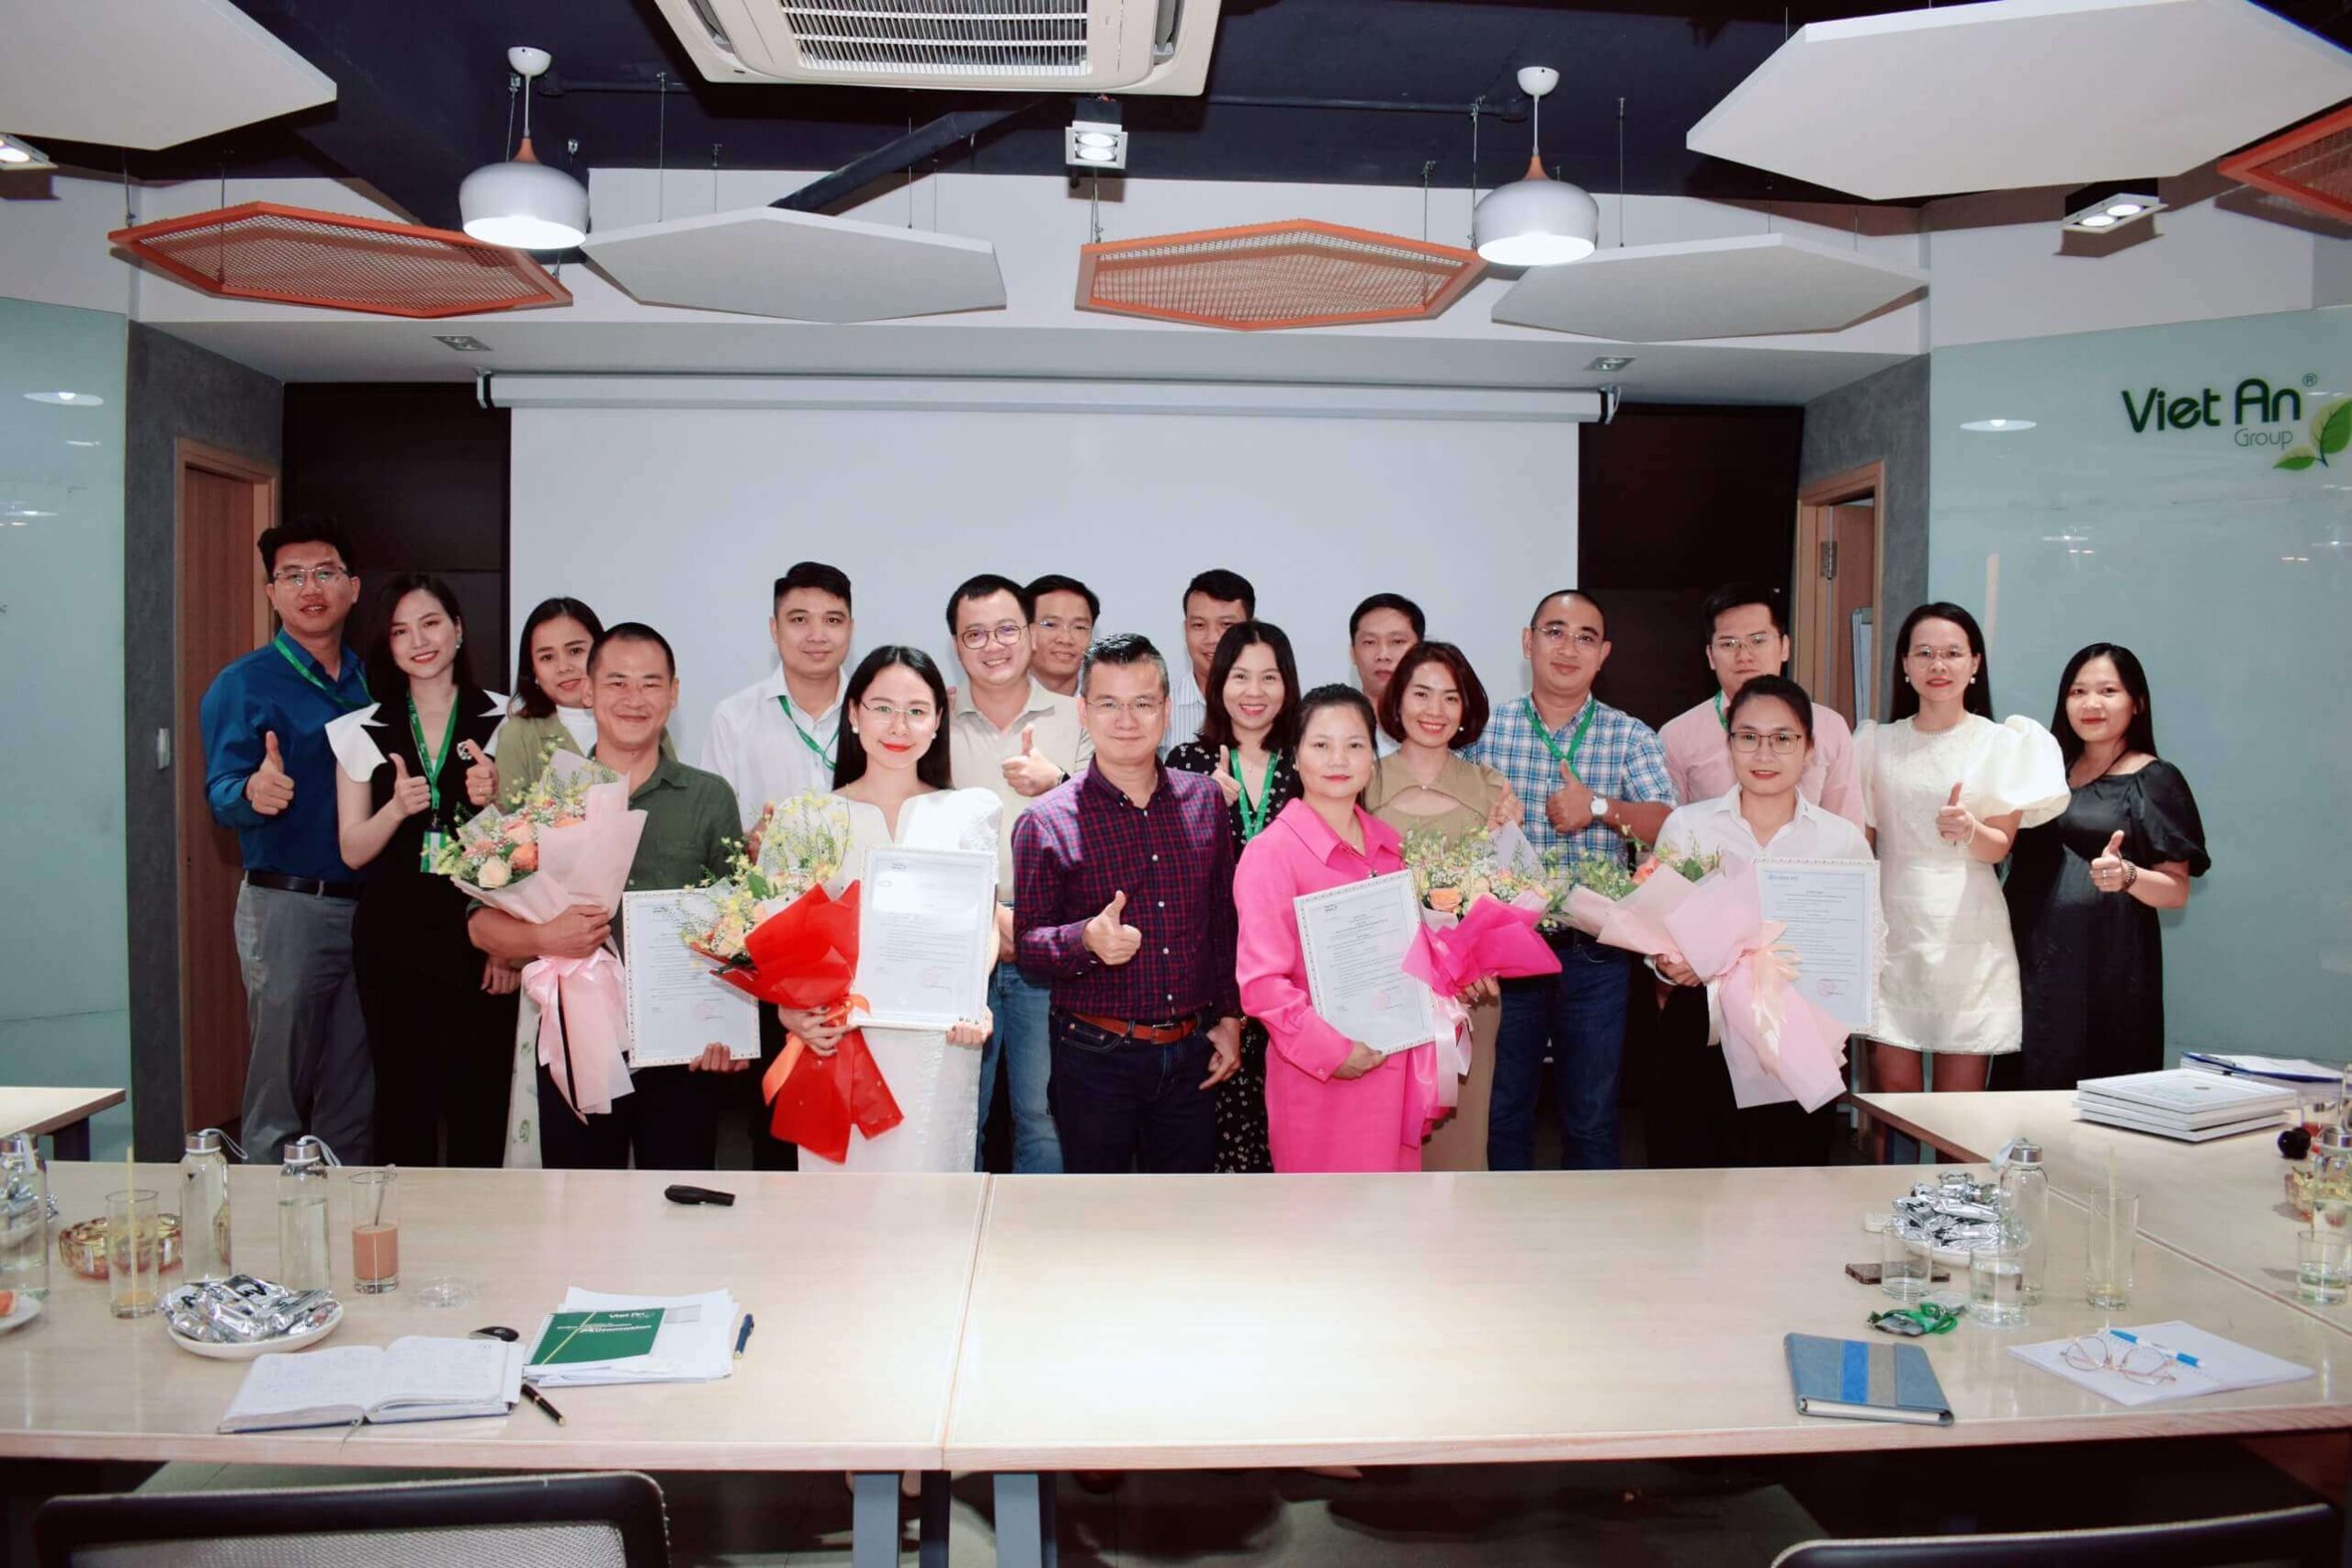 Viet An Group appoints important positions in the organization